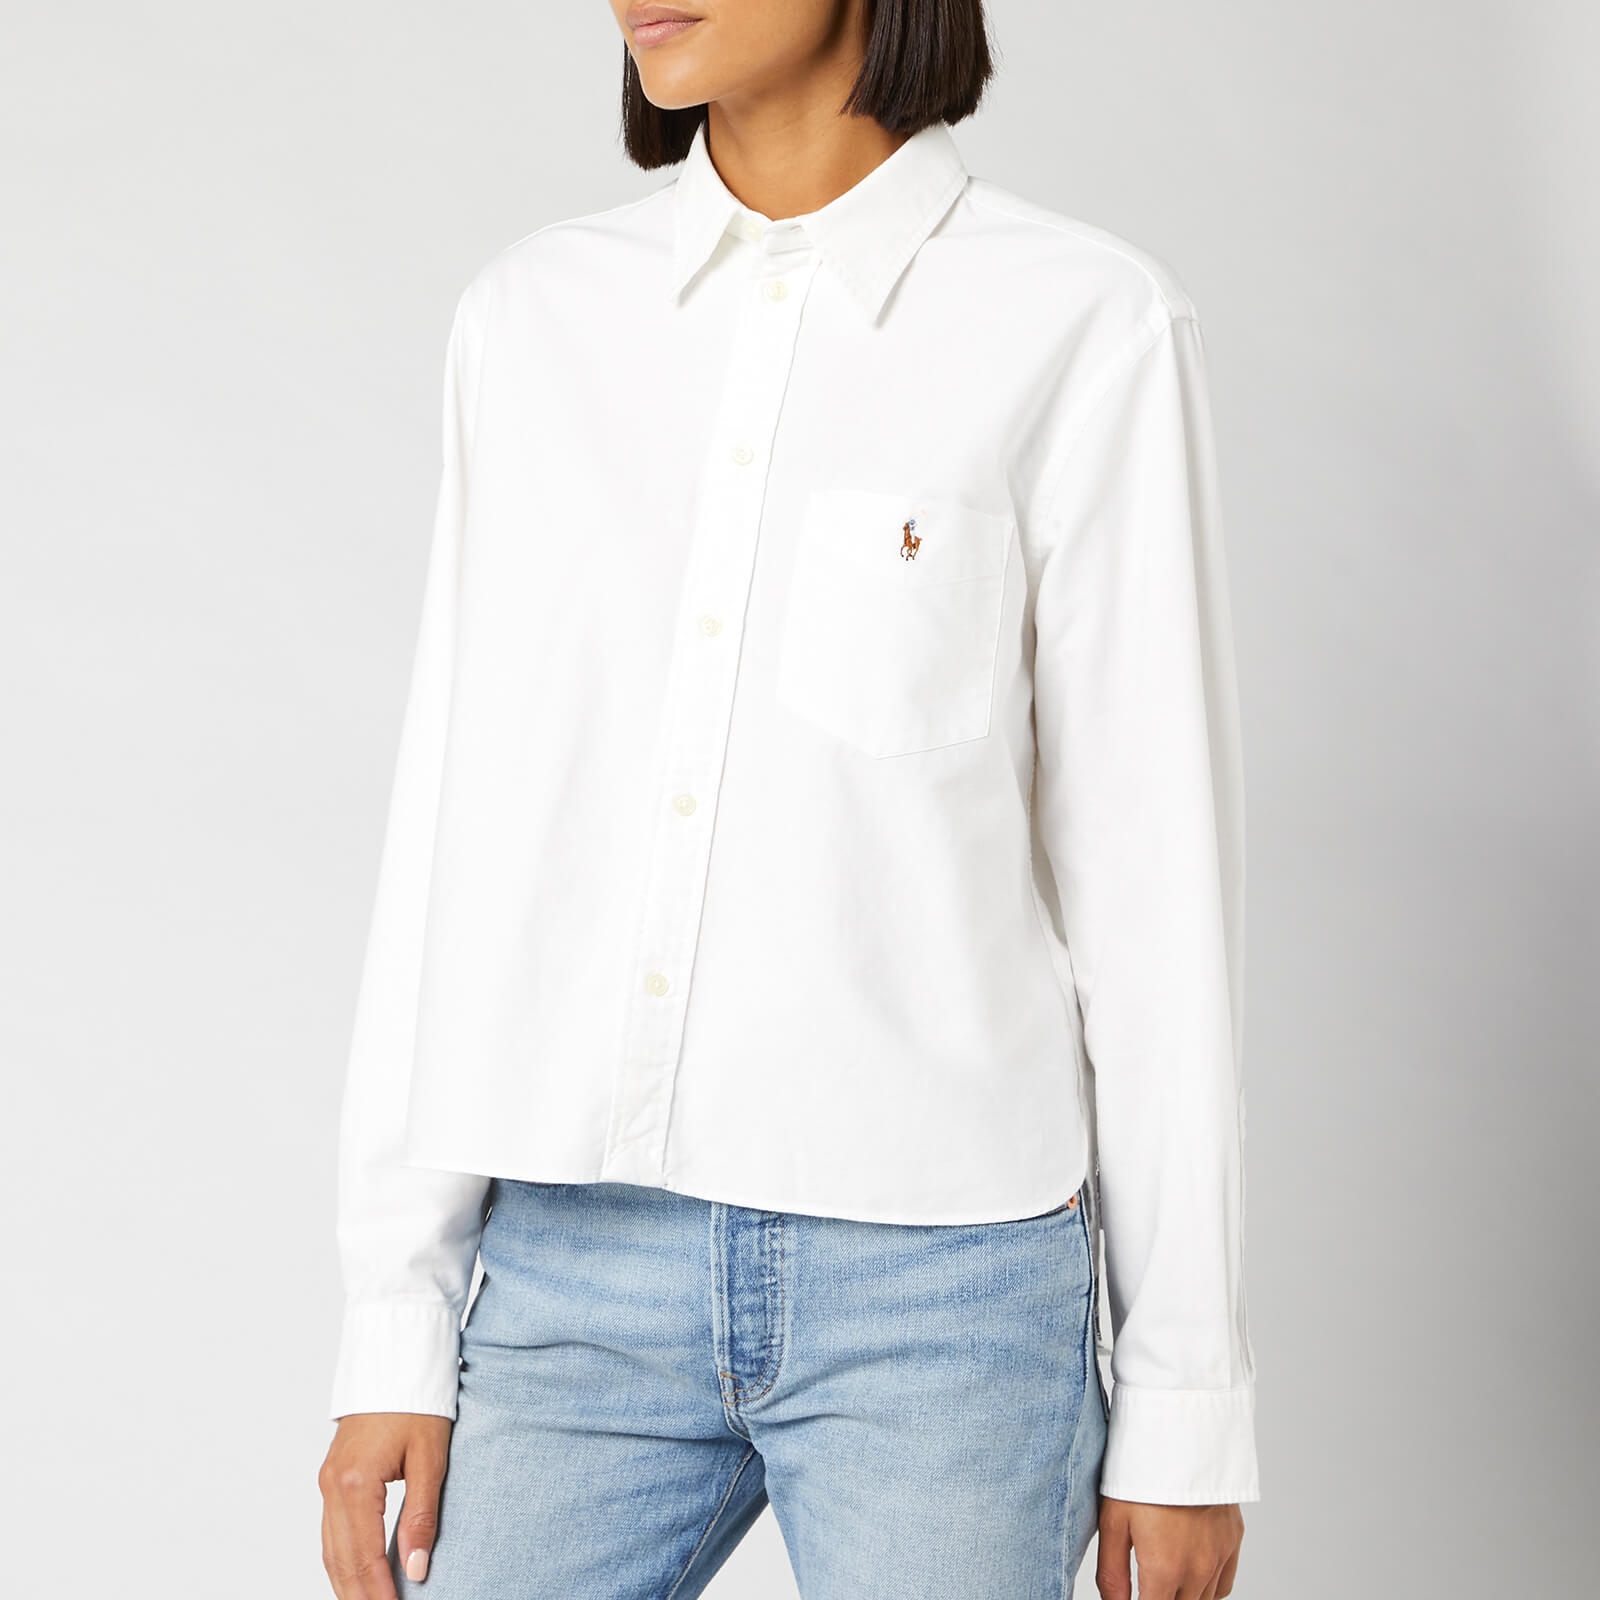 white polo long sleeve womens outfit